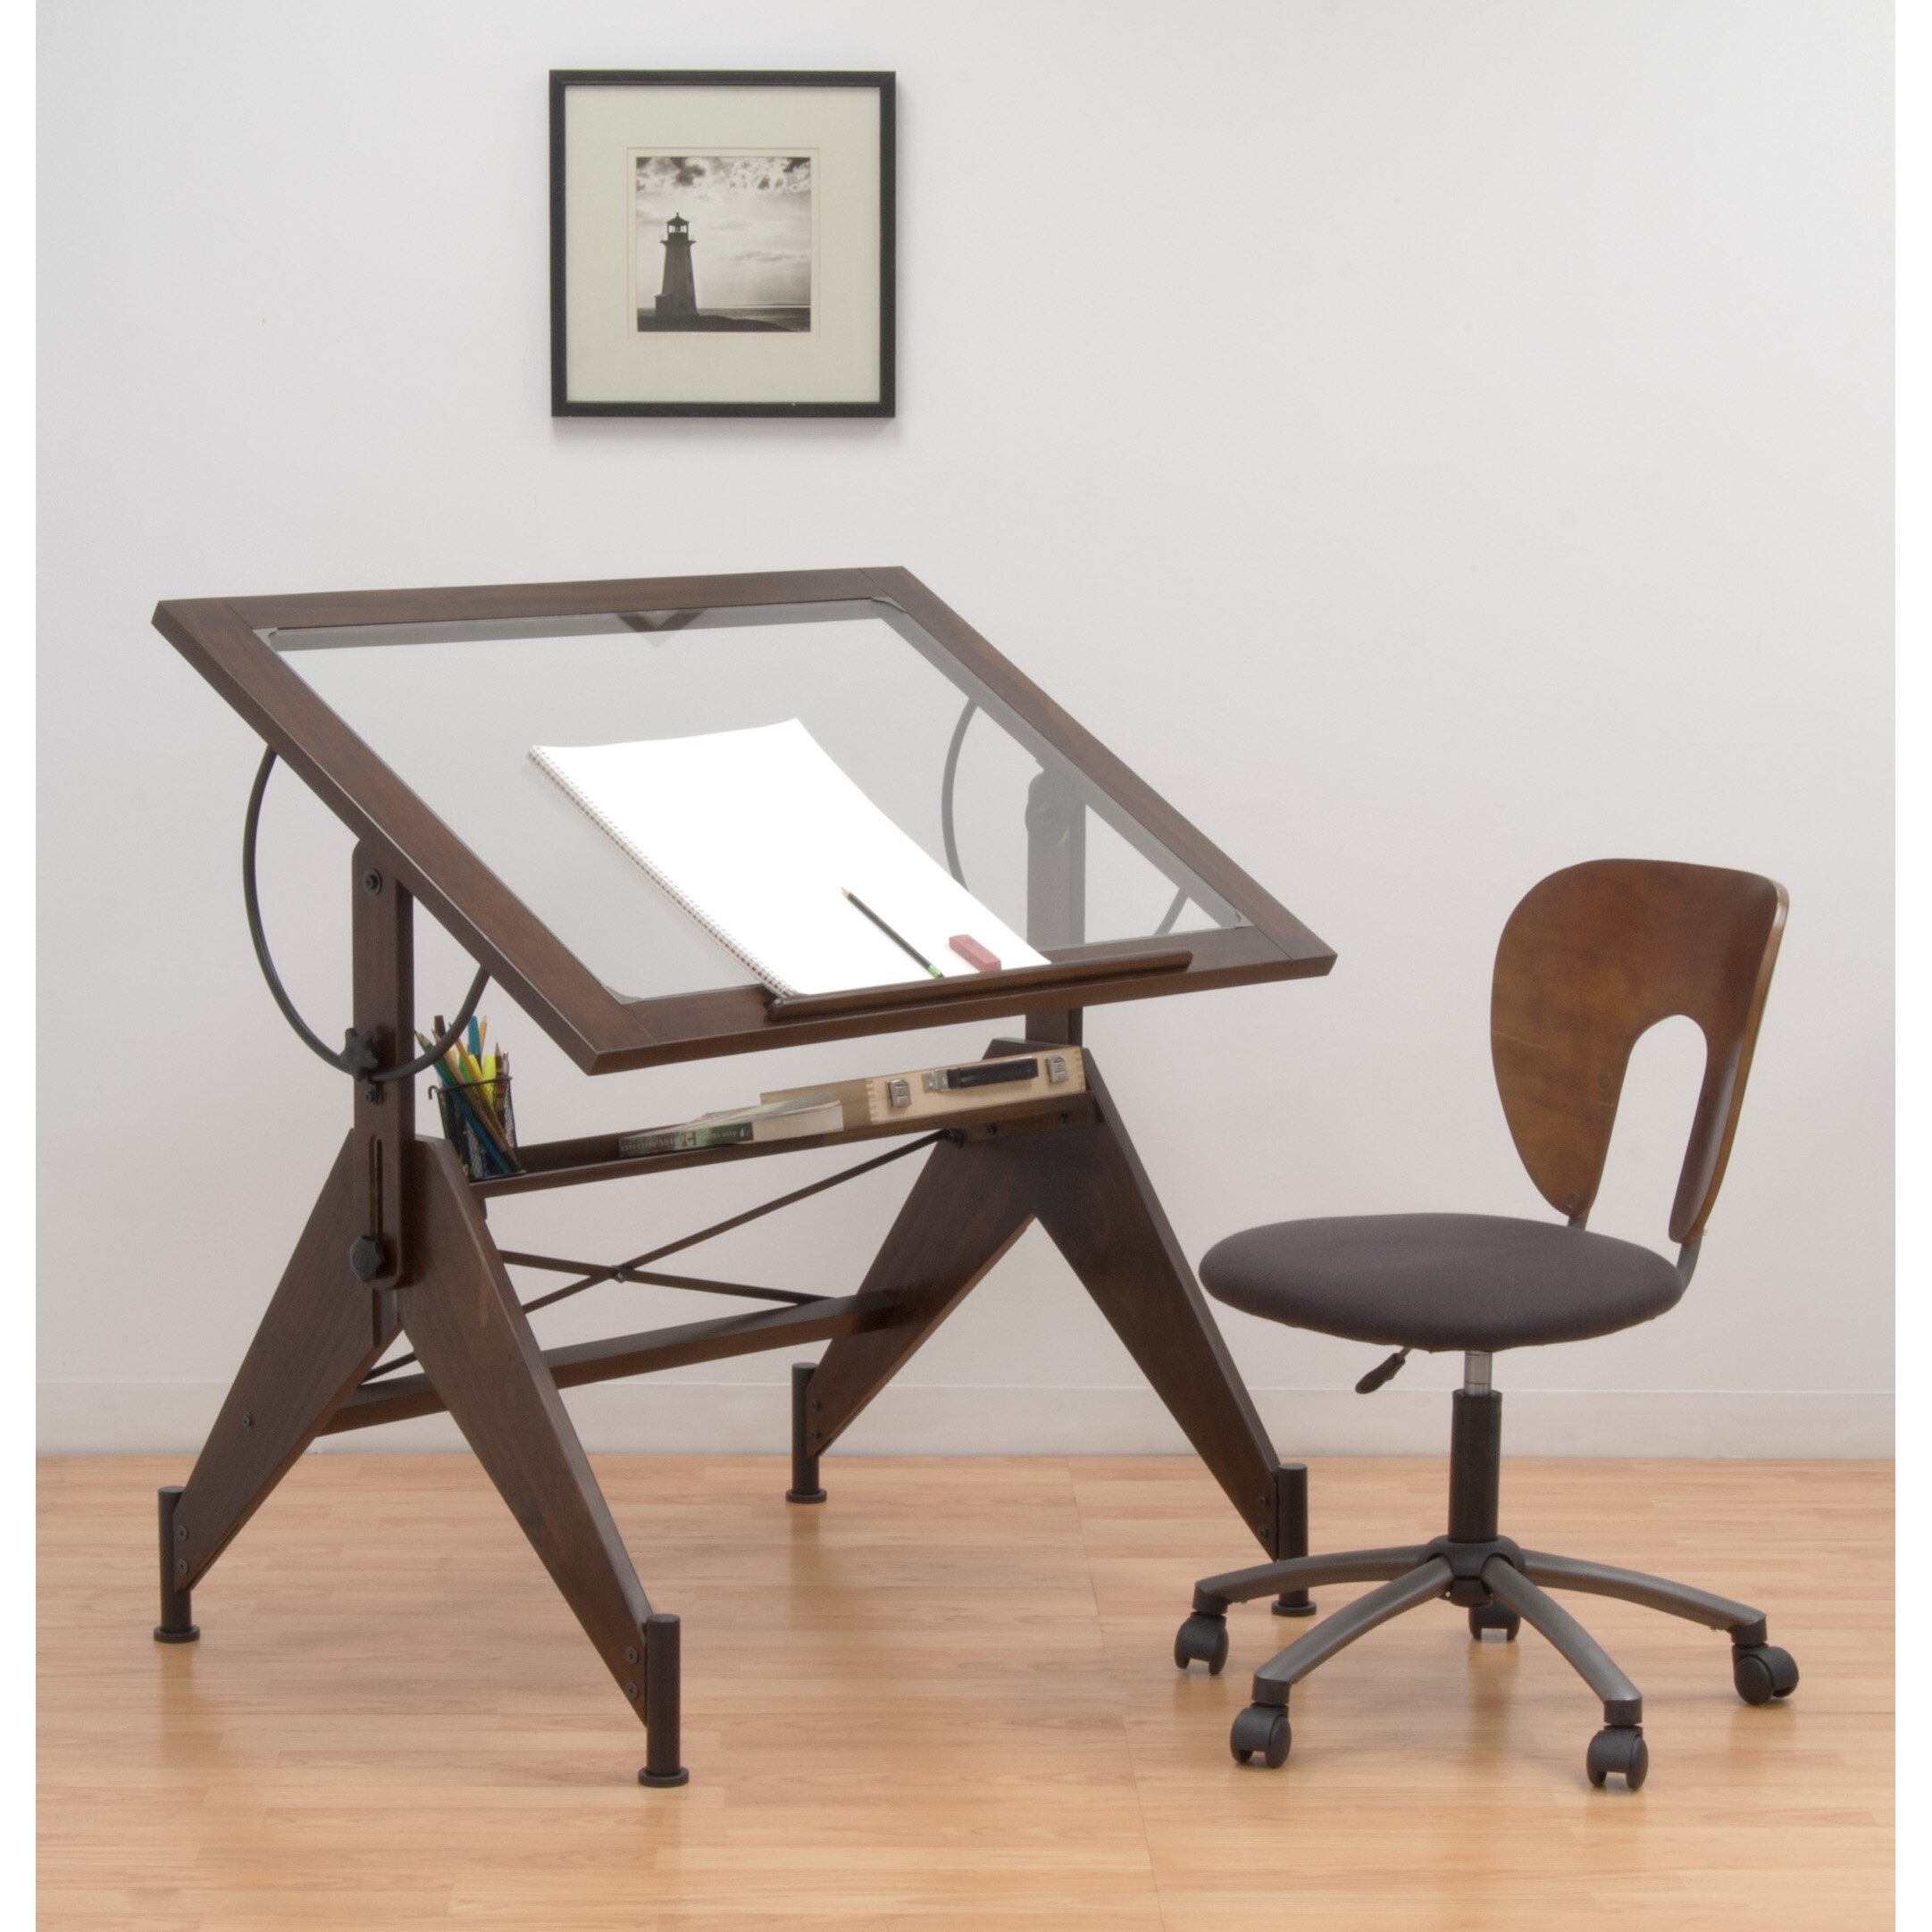 STUDIO DESIGNS Aries Glass Top Drafting Table Sonoma Brown/Clear Glass 13310